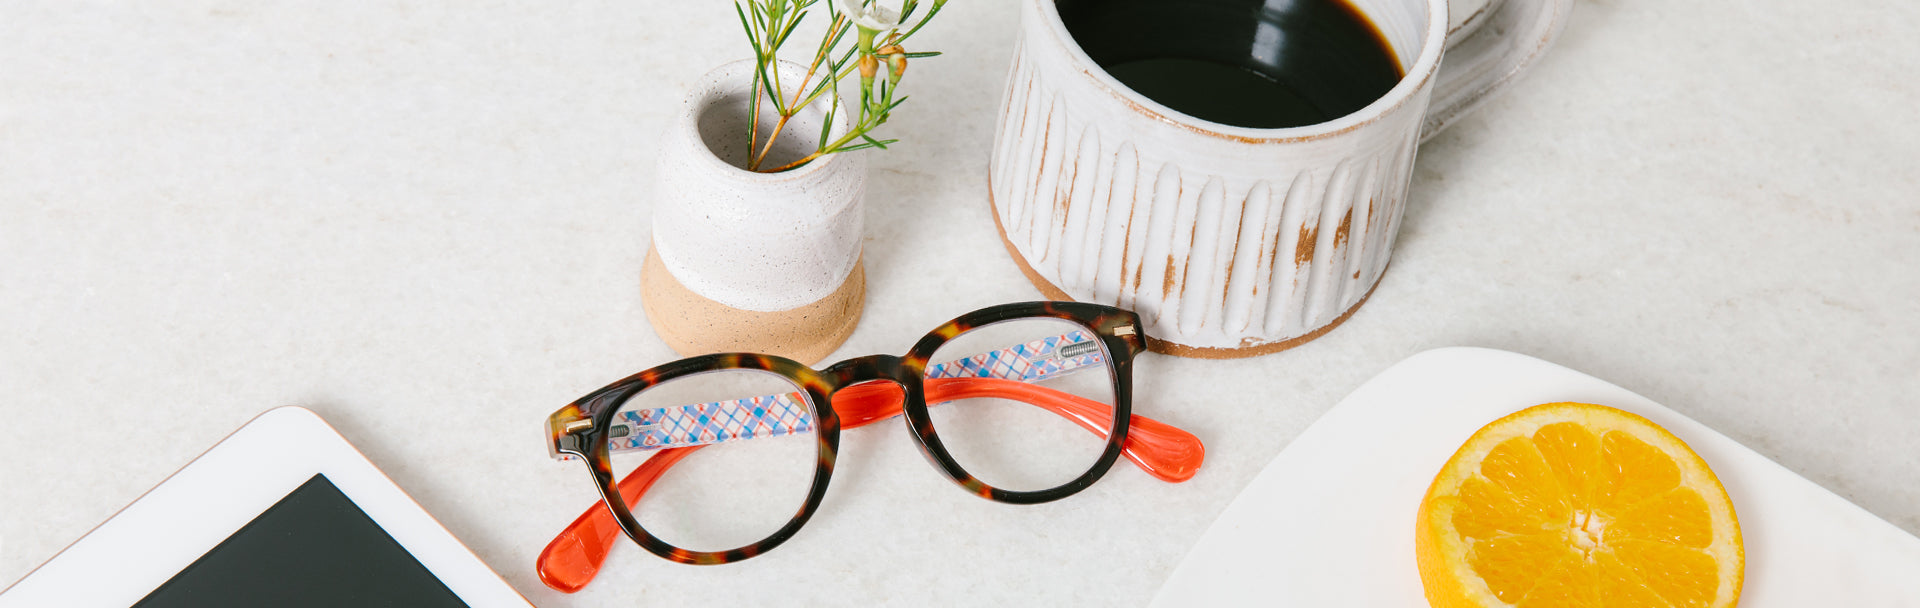 Peepers reading glasses on a breakfast table